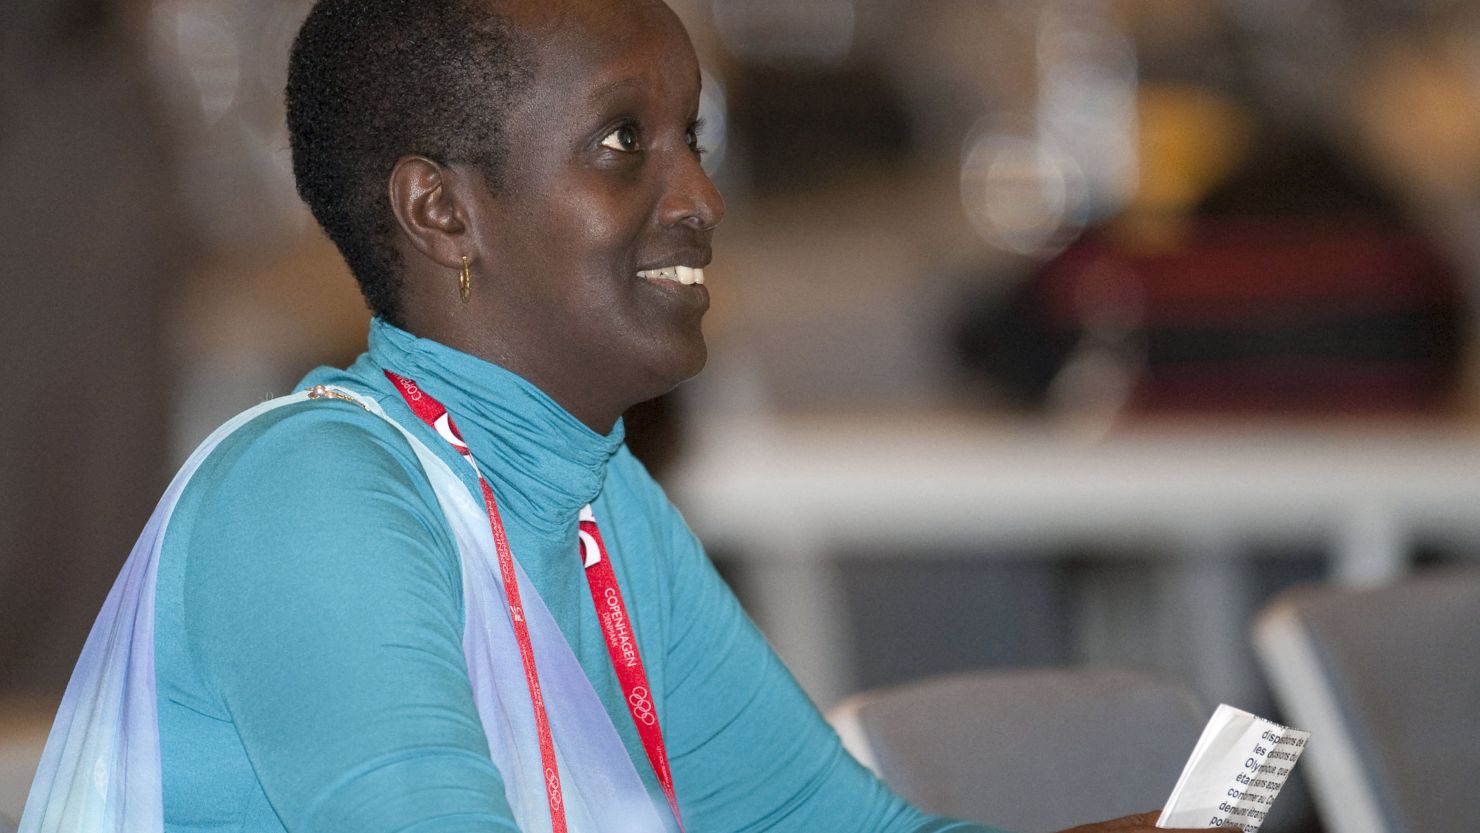 Burundi's Lydia Nsekera is becoming an influential figure with both FIFA and the International Olympic Committee.